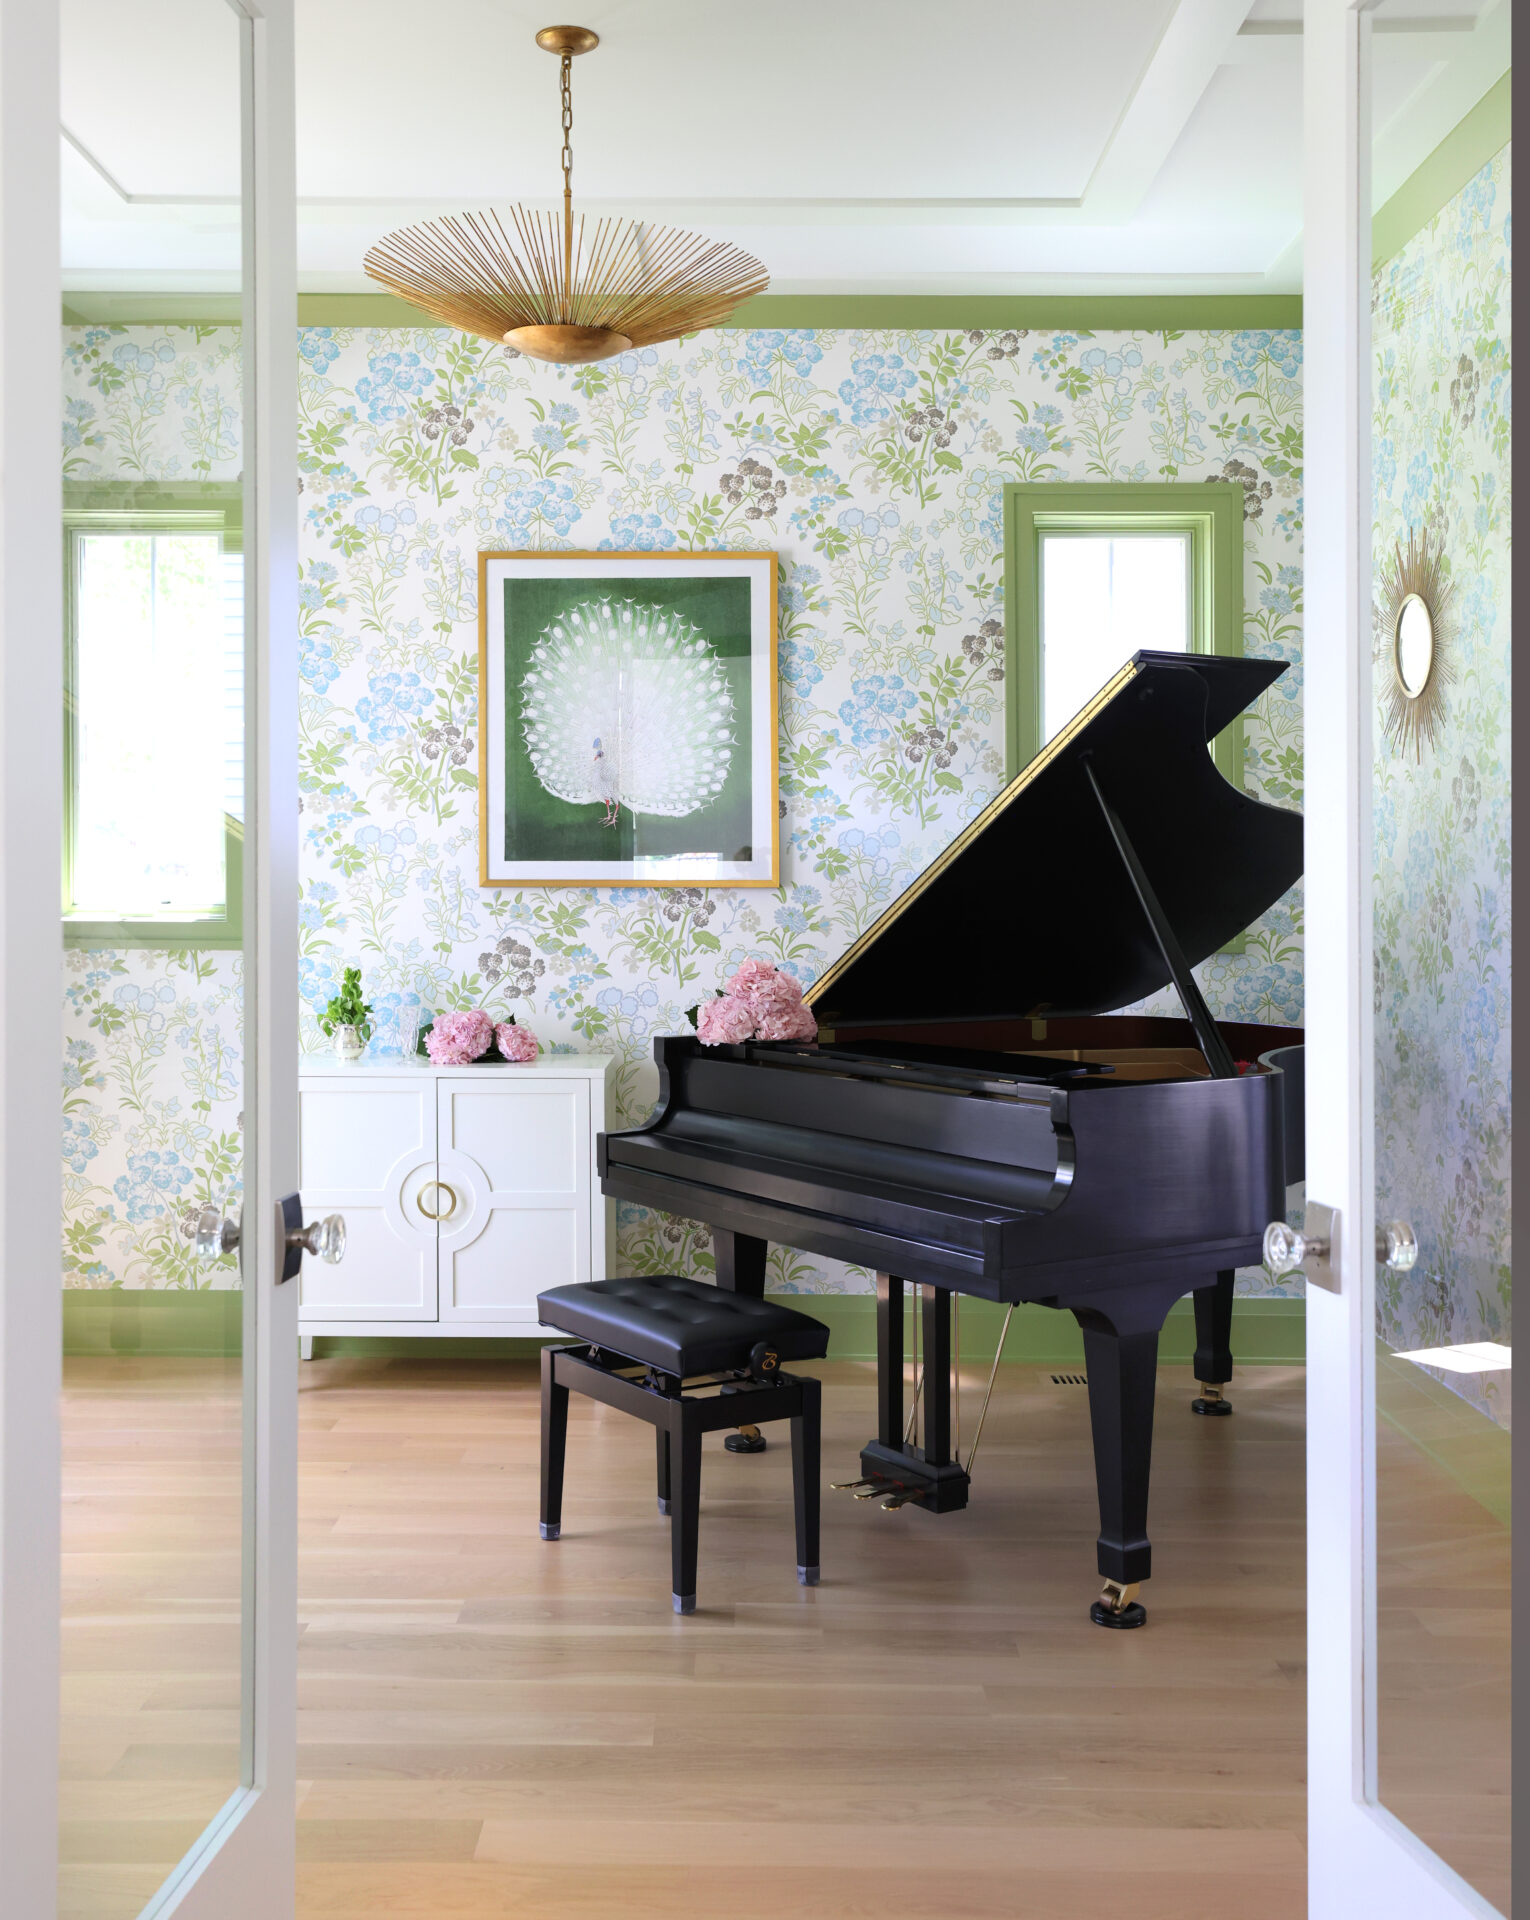 Piano in the Room